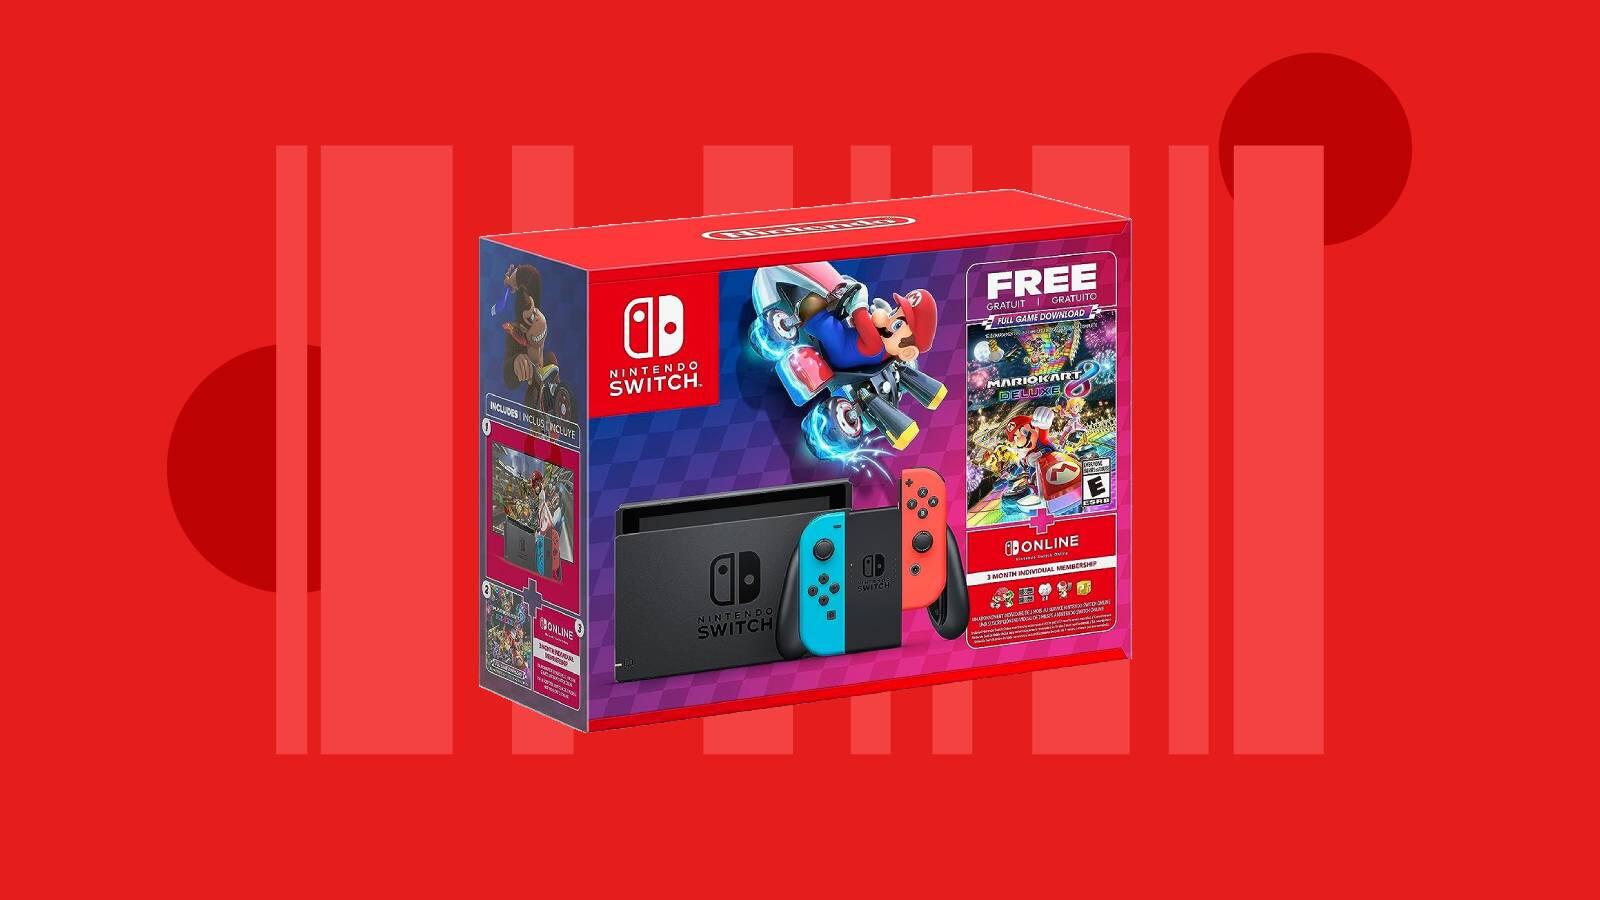 Nintendo Switch Black Friday console deals go live today!